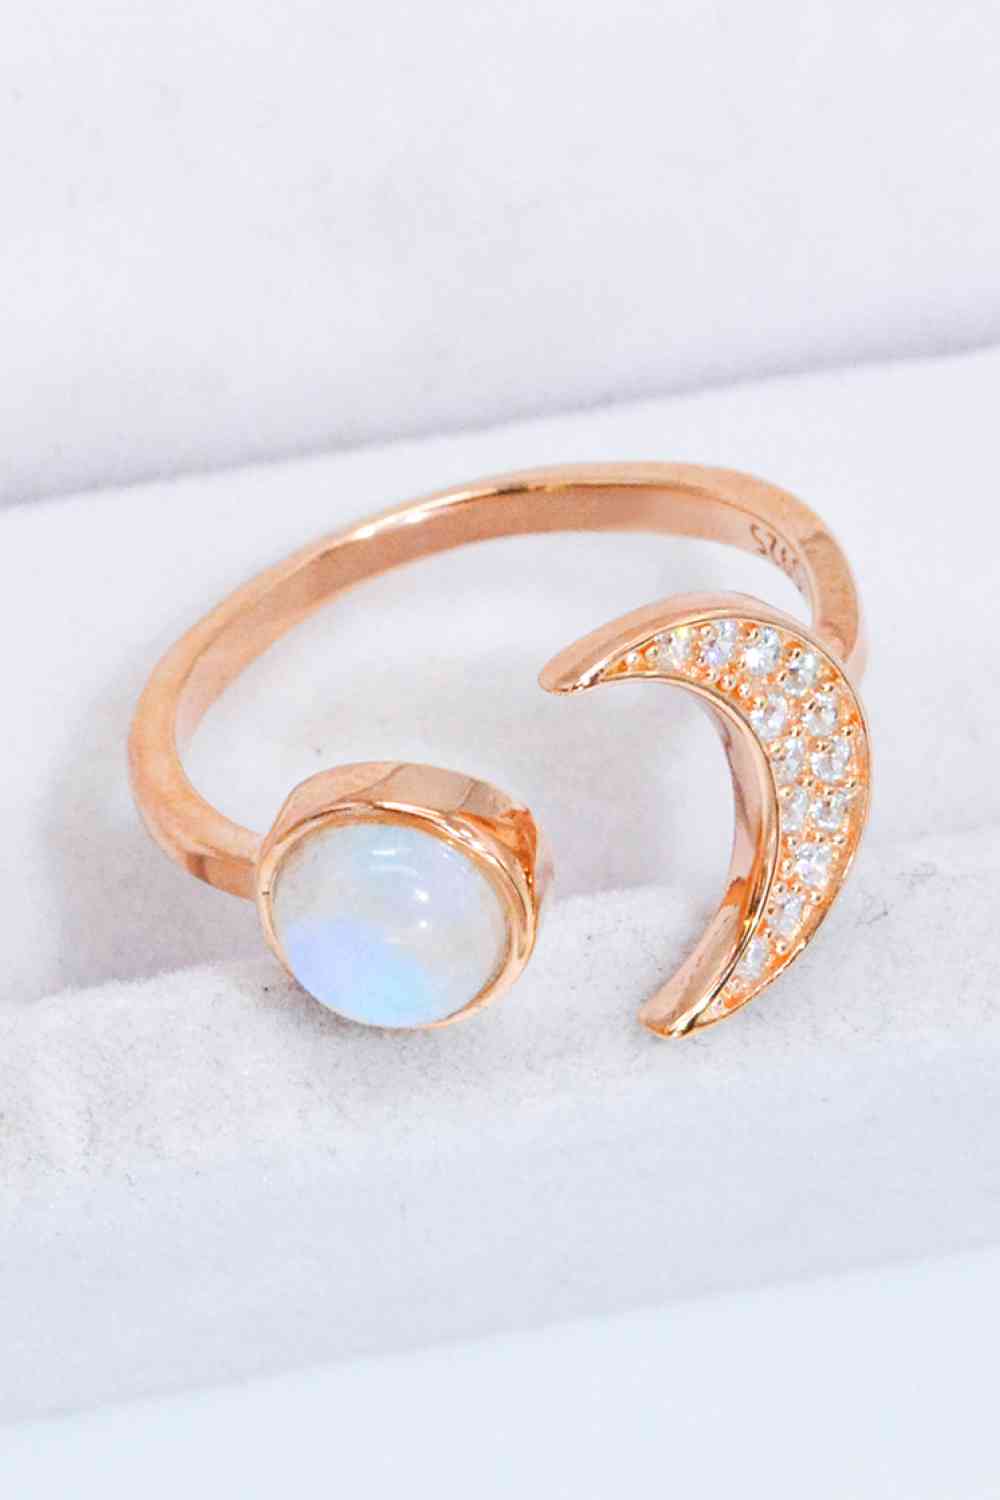 Ethereal Ring Adorned with Natural Moonstone and Zircon, Sun and Moon in Perfect Harmony